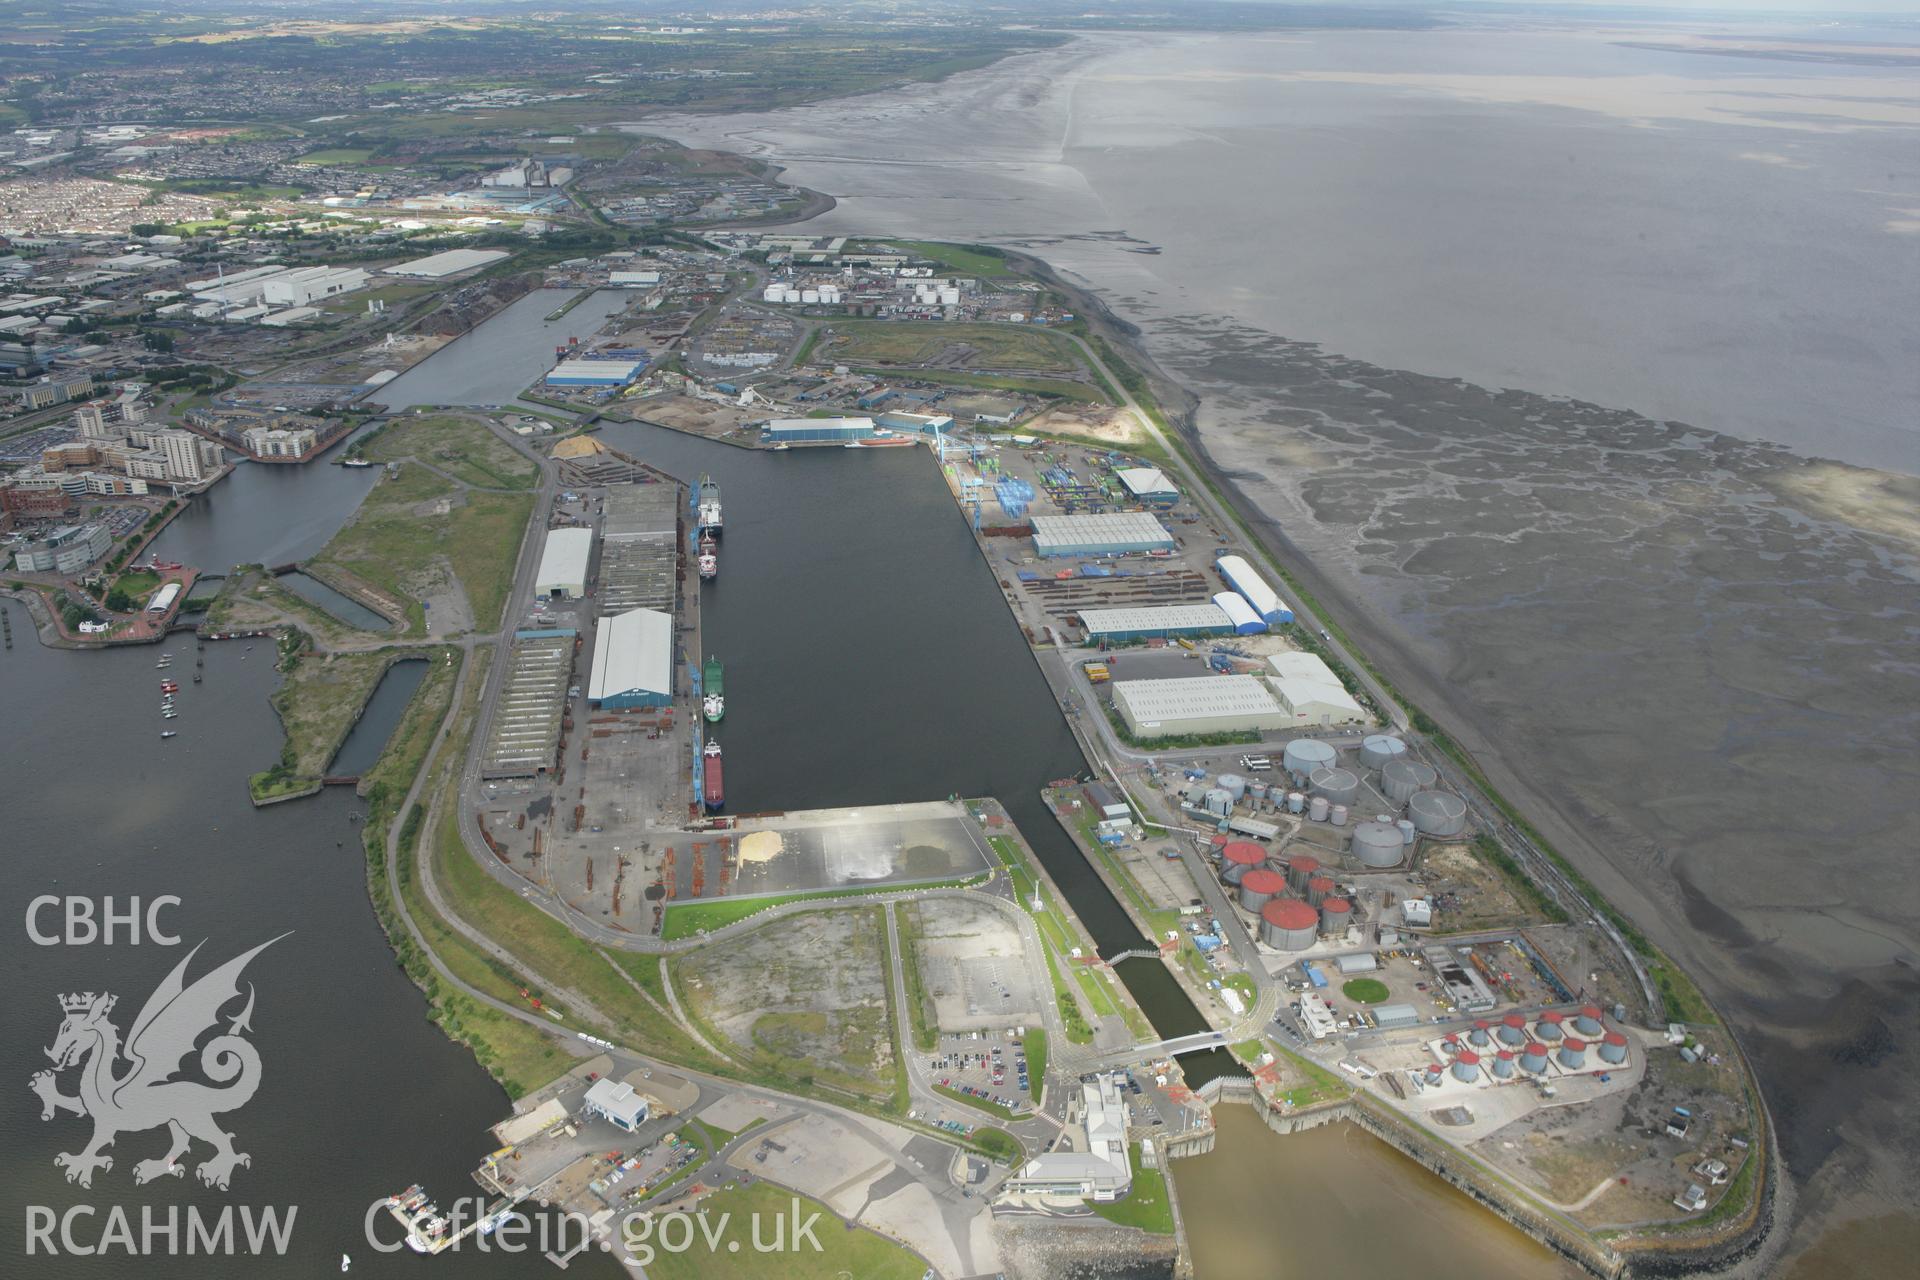 RCAHMW colour oblique aerial photograph of Queen Alexandra Dock in Cardiff Docks. Taken on 30 July 2007 by Toby Driver